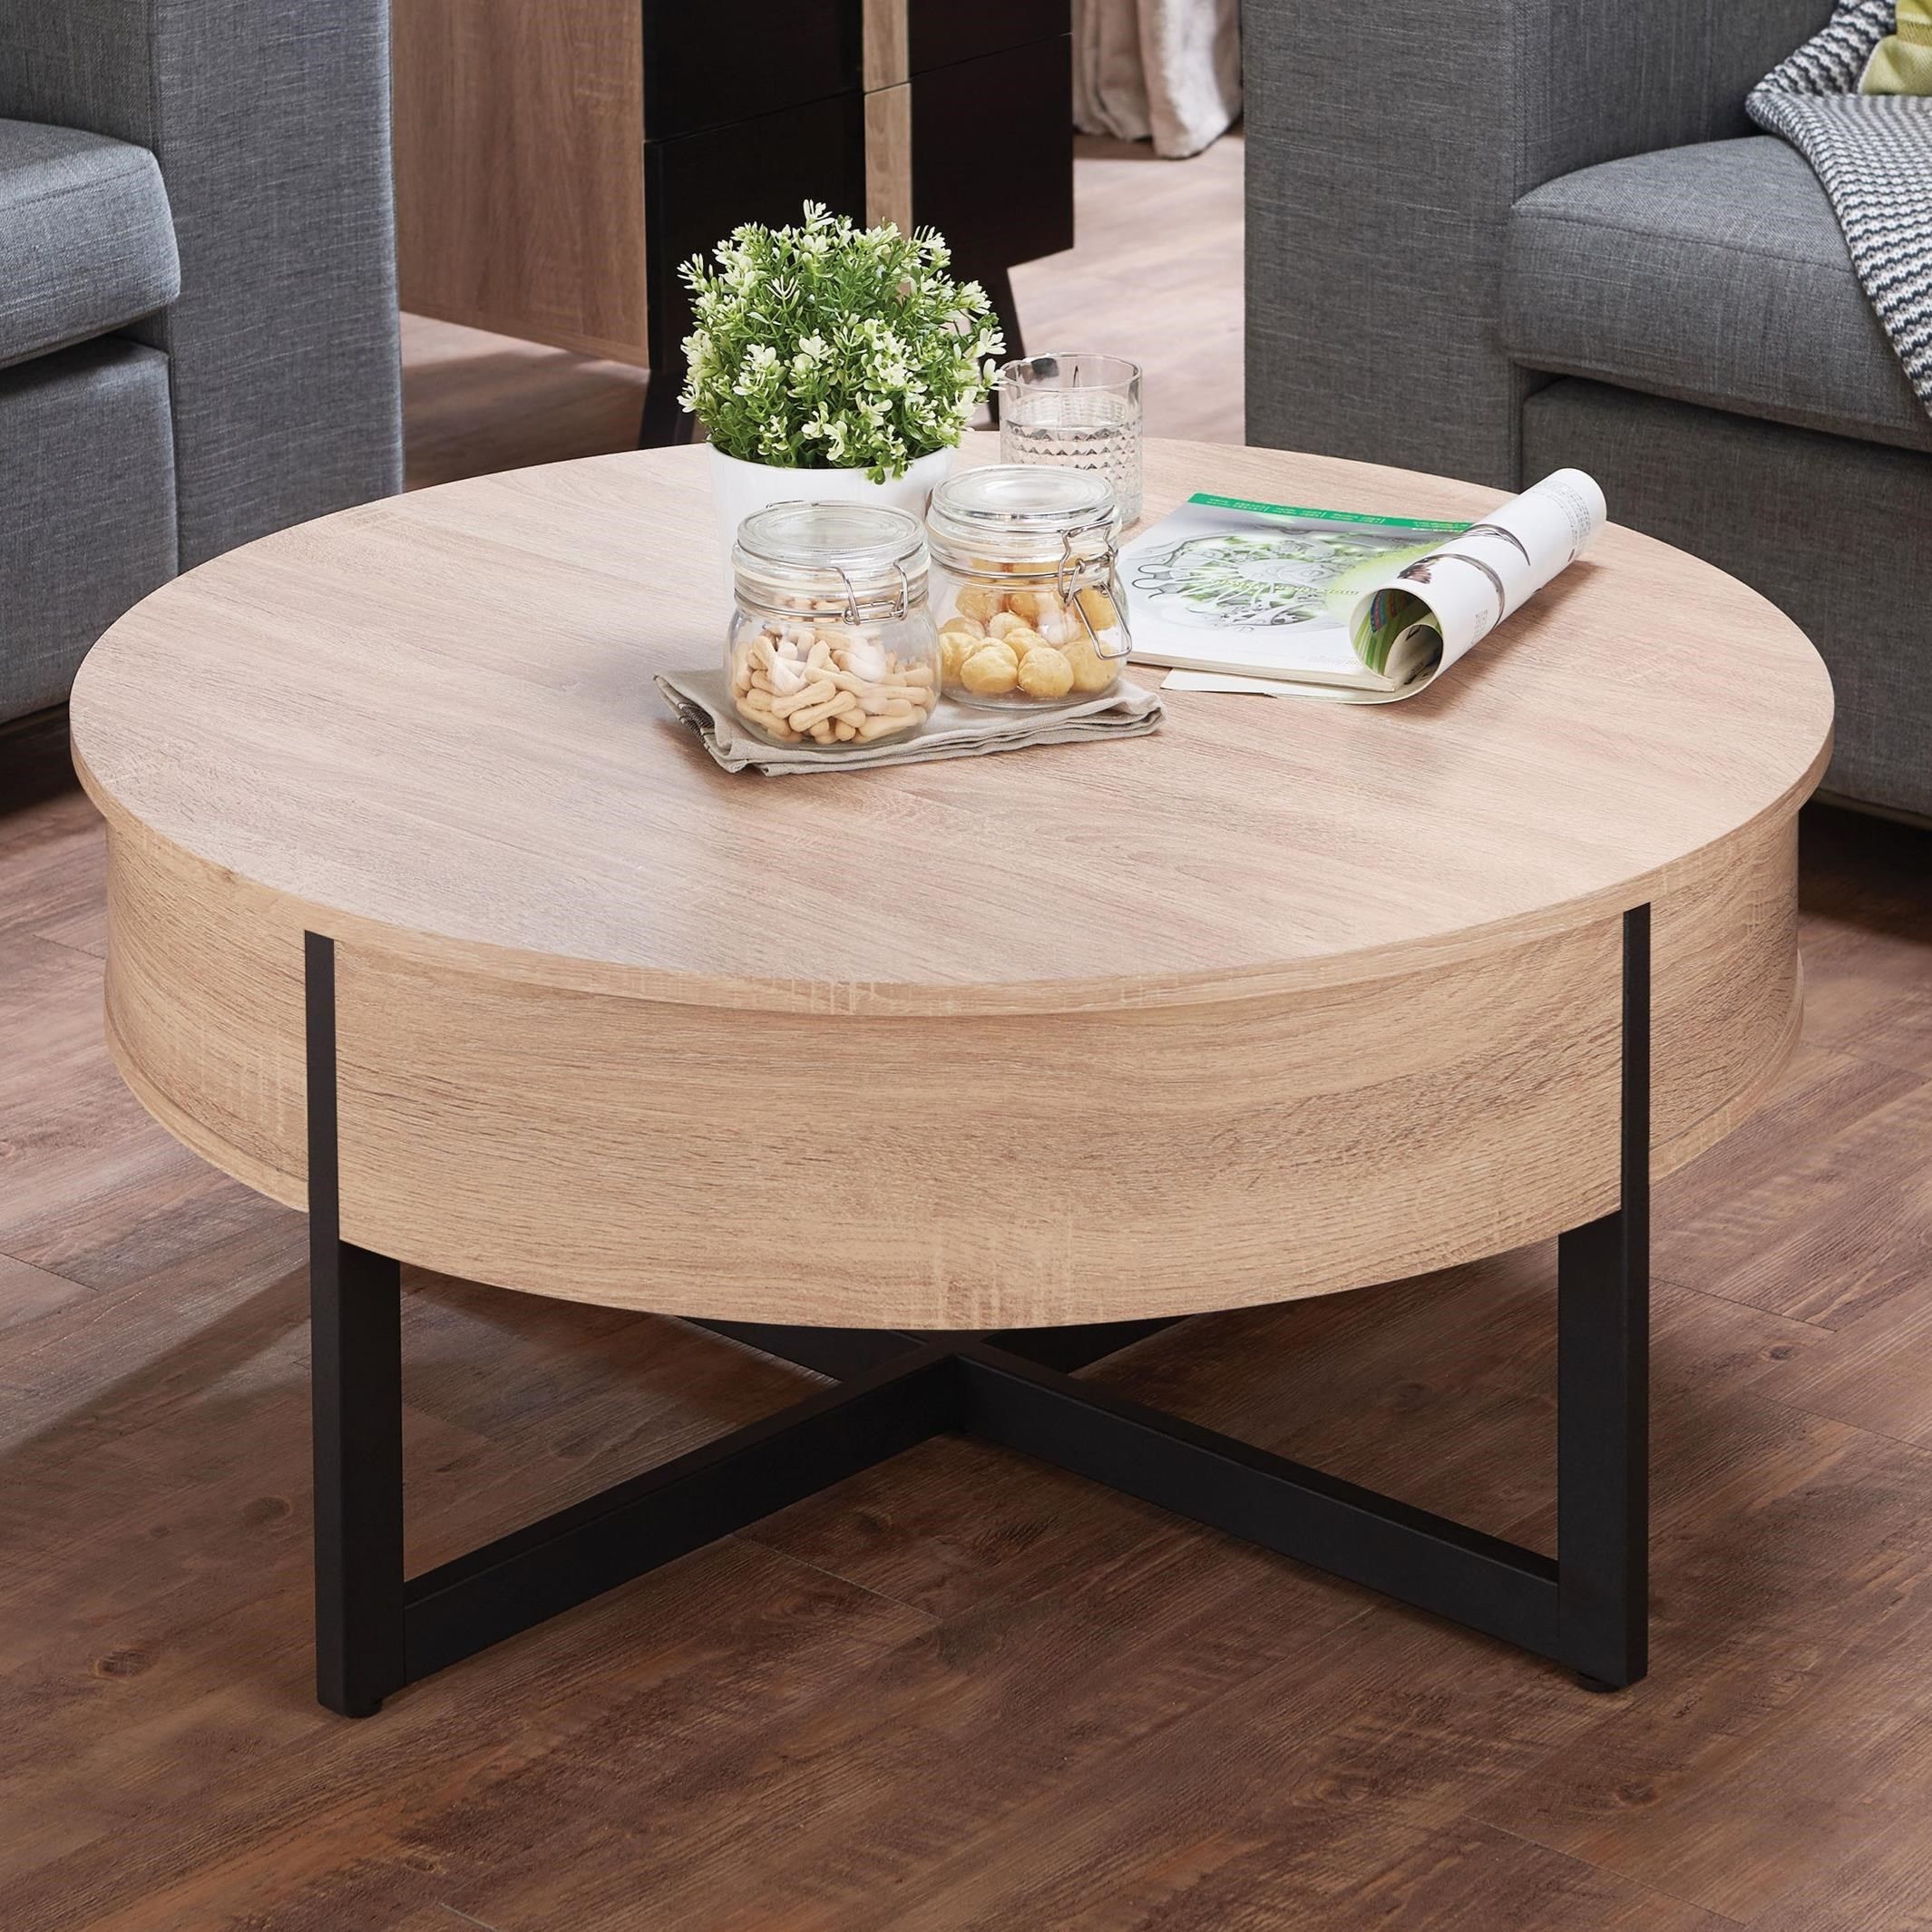 Corner Coffee Table With Storage – Amalina In Round Coffee Tables With Storage (Gallery 13 of 20)